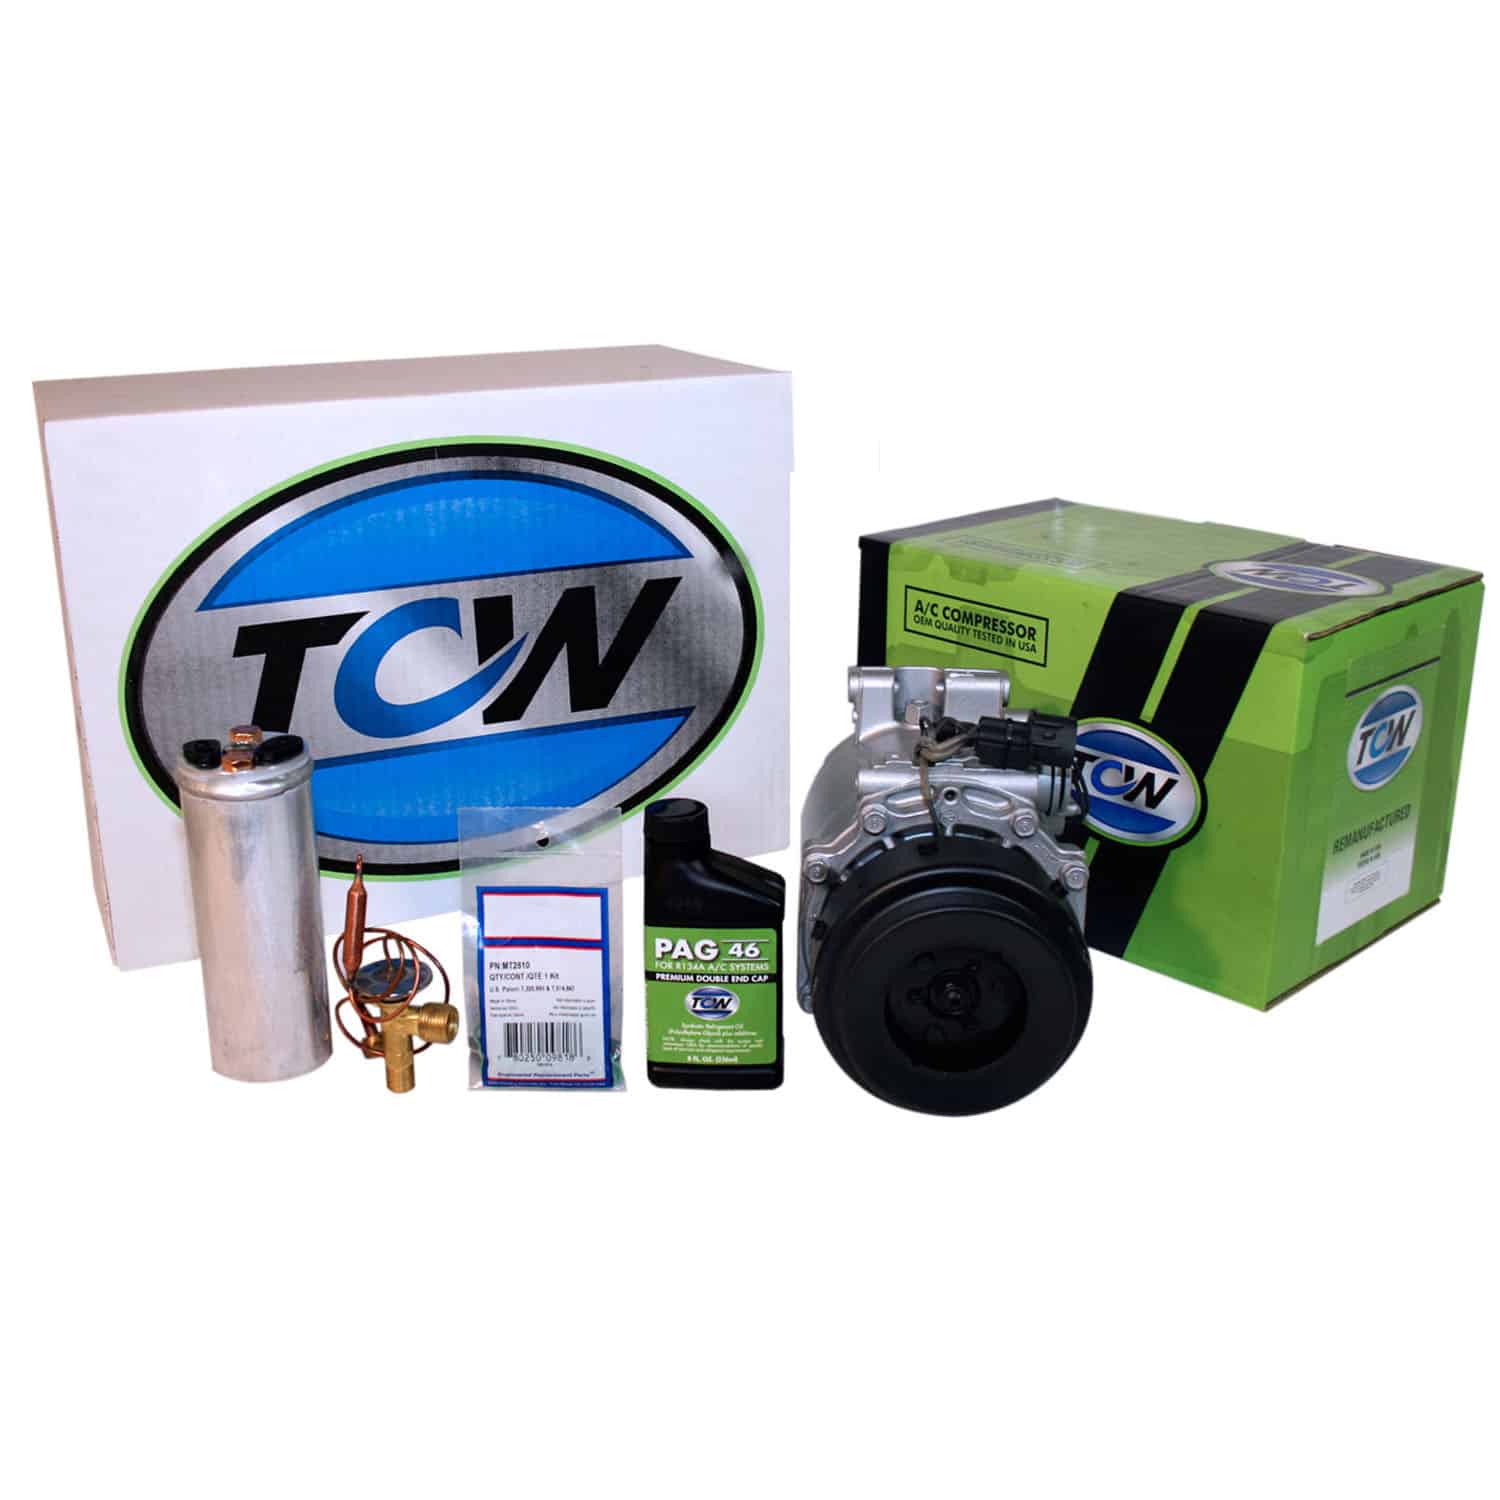 TCW Vehicle A/C Kit K1000267R Remanufactured Product Image field_60b6a13a6e67c